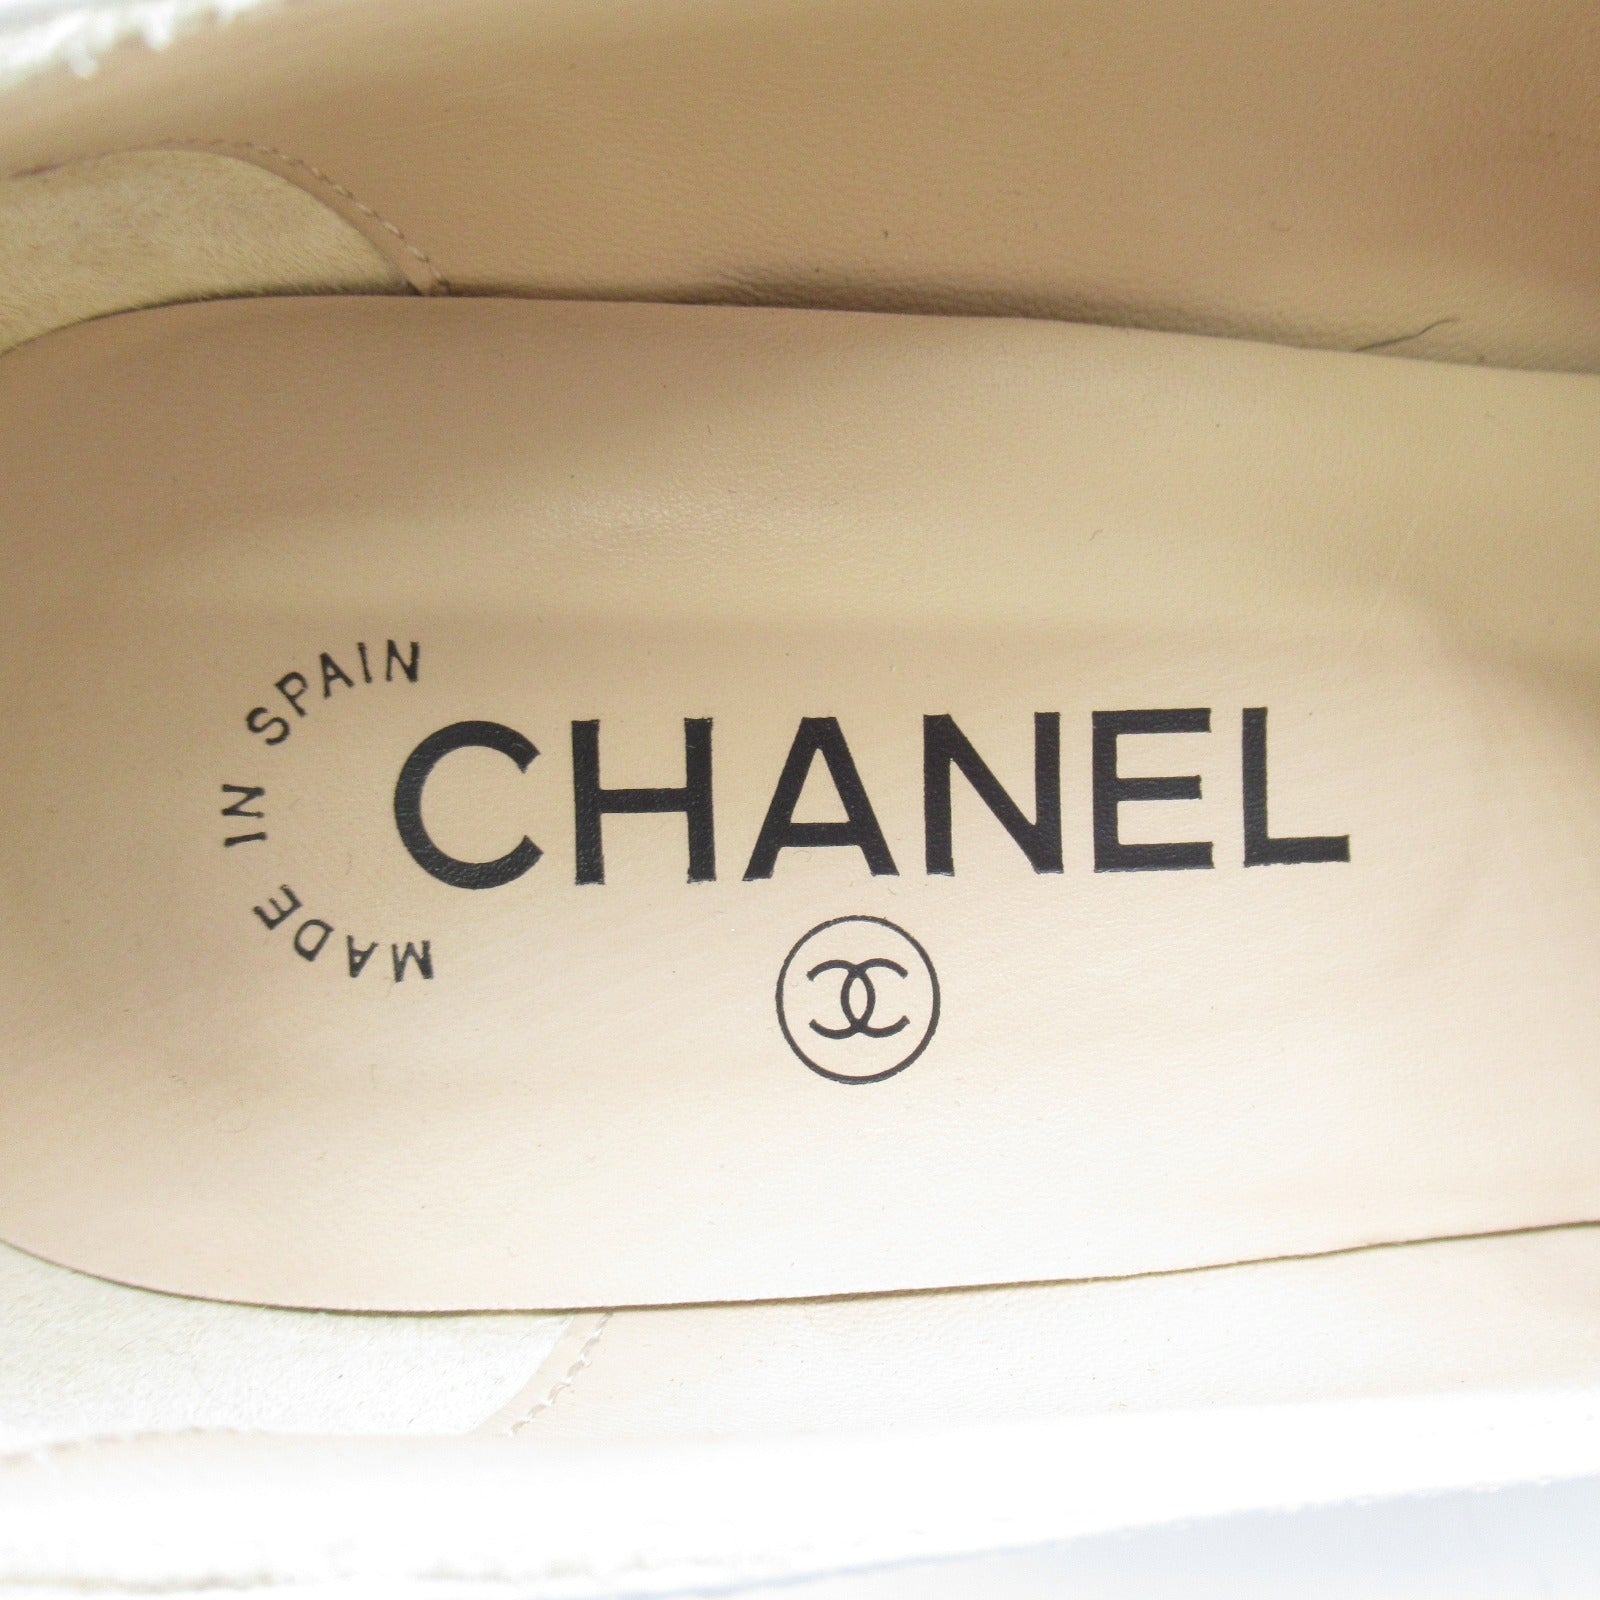 CHANEL CHANEL SPADROW— Trainers Shoes Leather  Gr / Black G34659 【】 Sniper